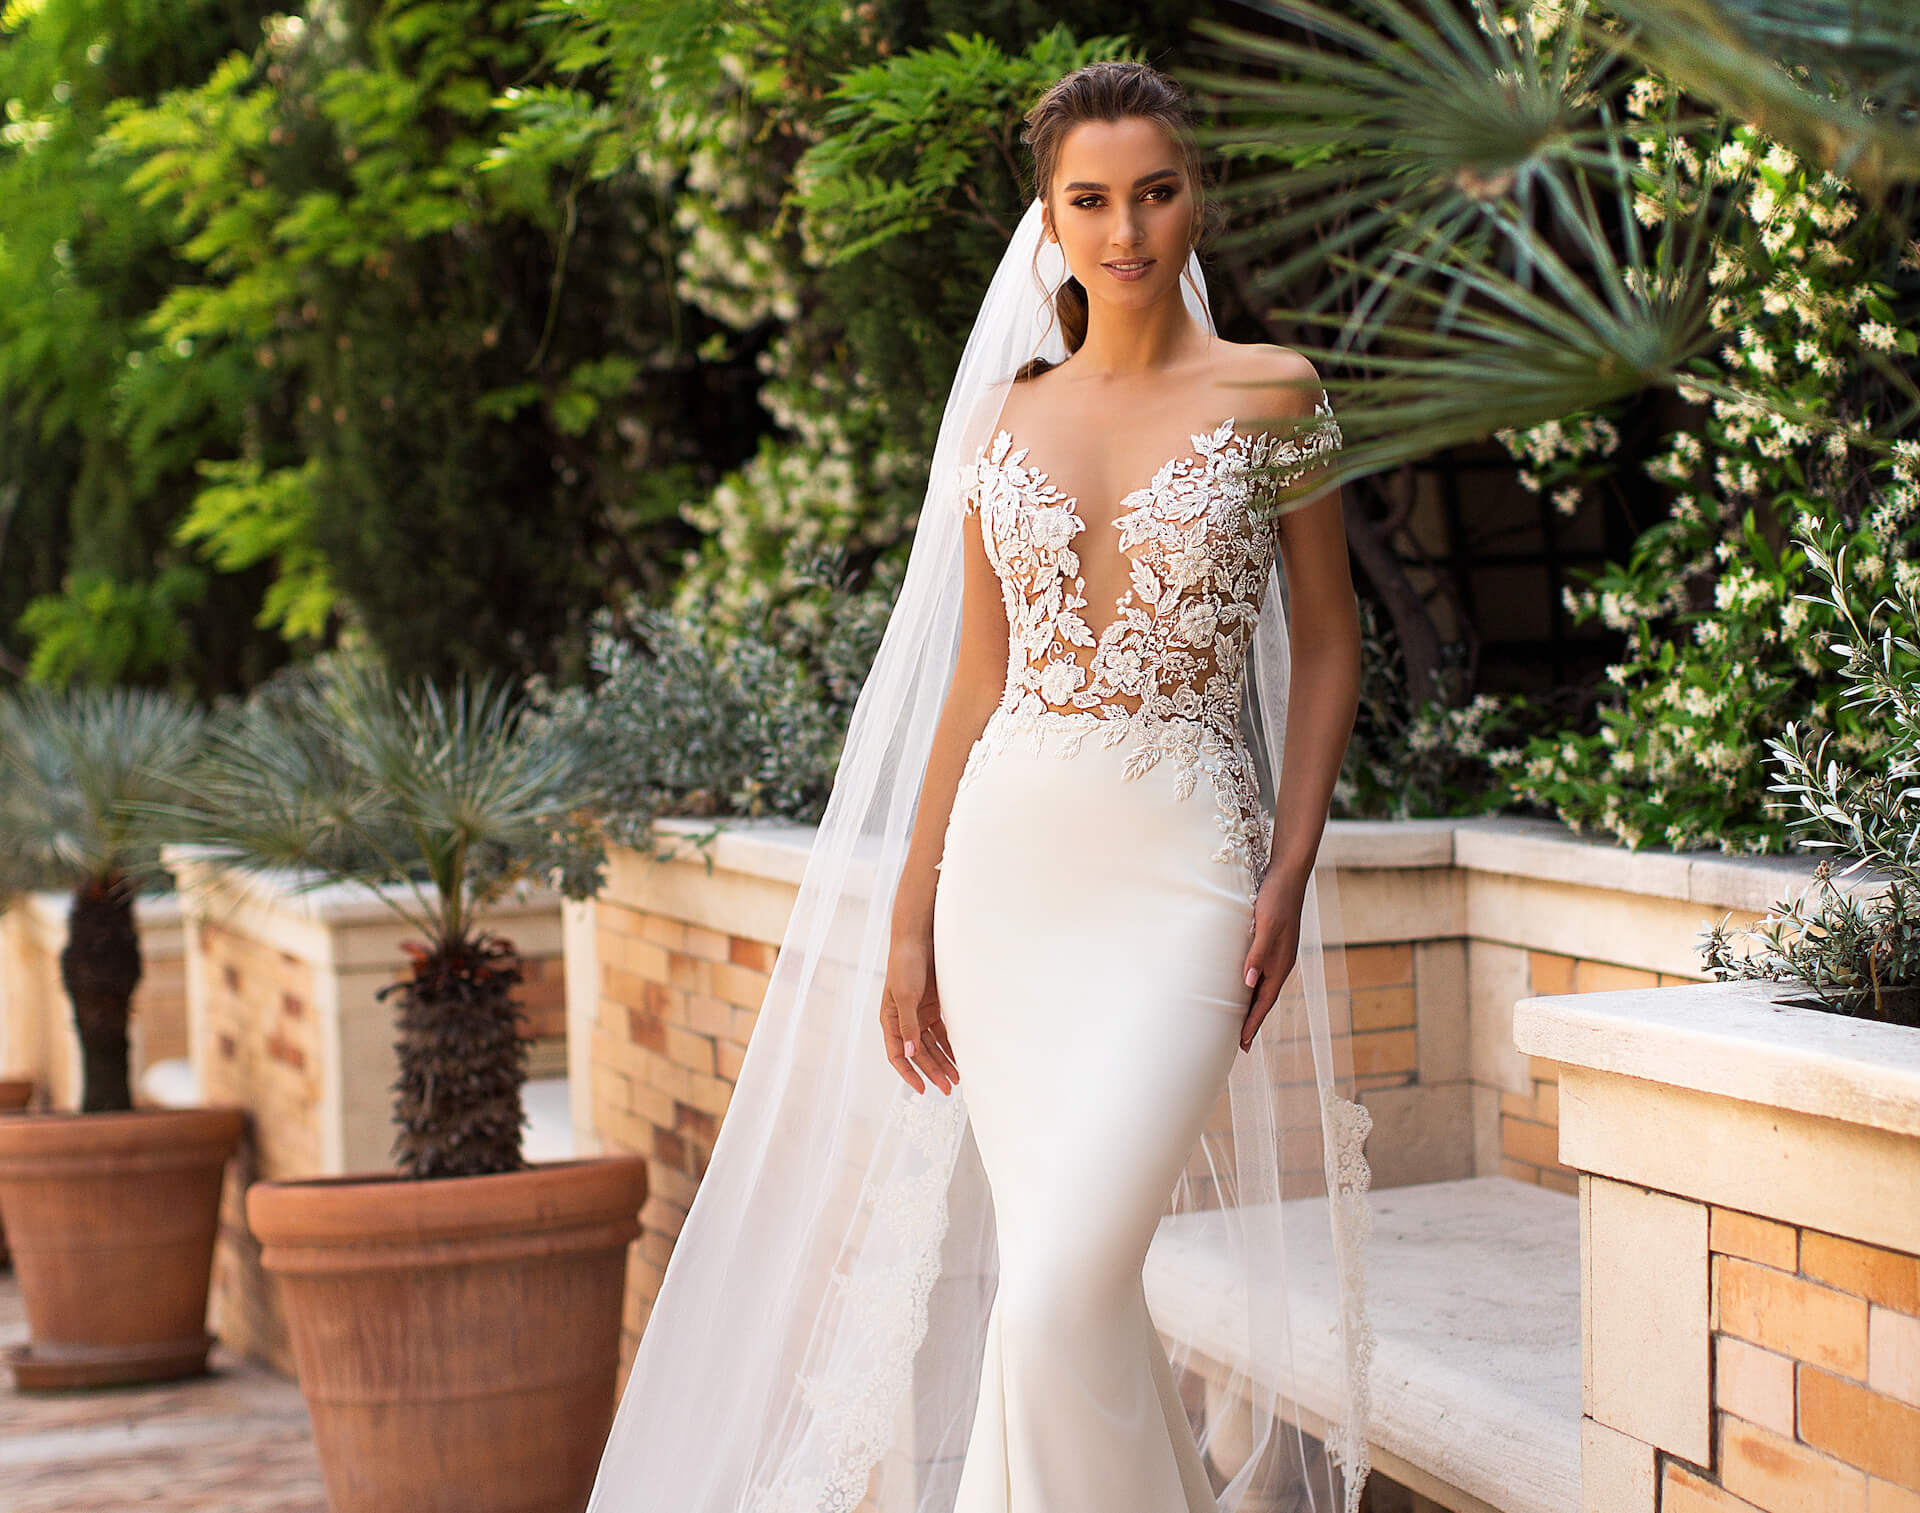 Wedding Dresses in Dallas – The Best Shops to Find Your Gown!